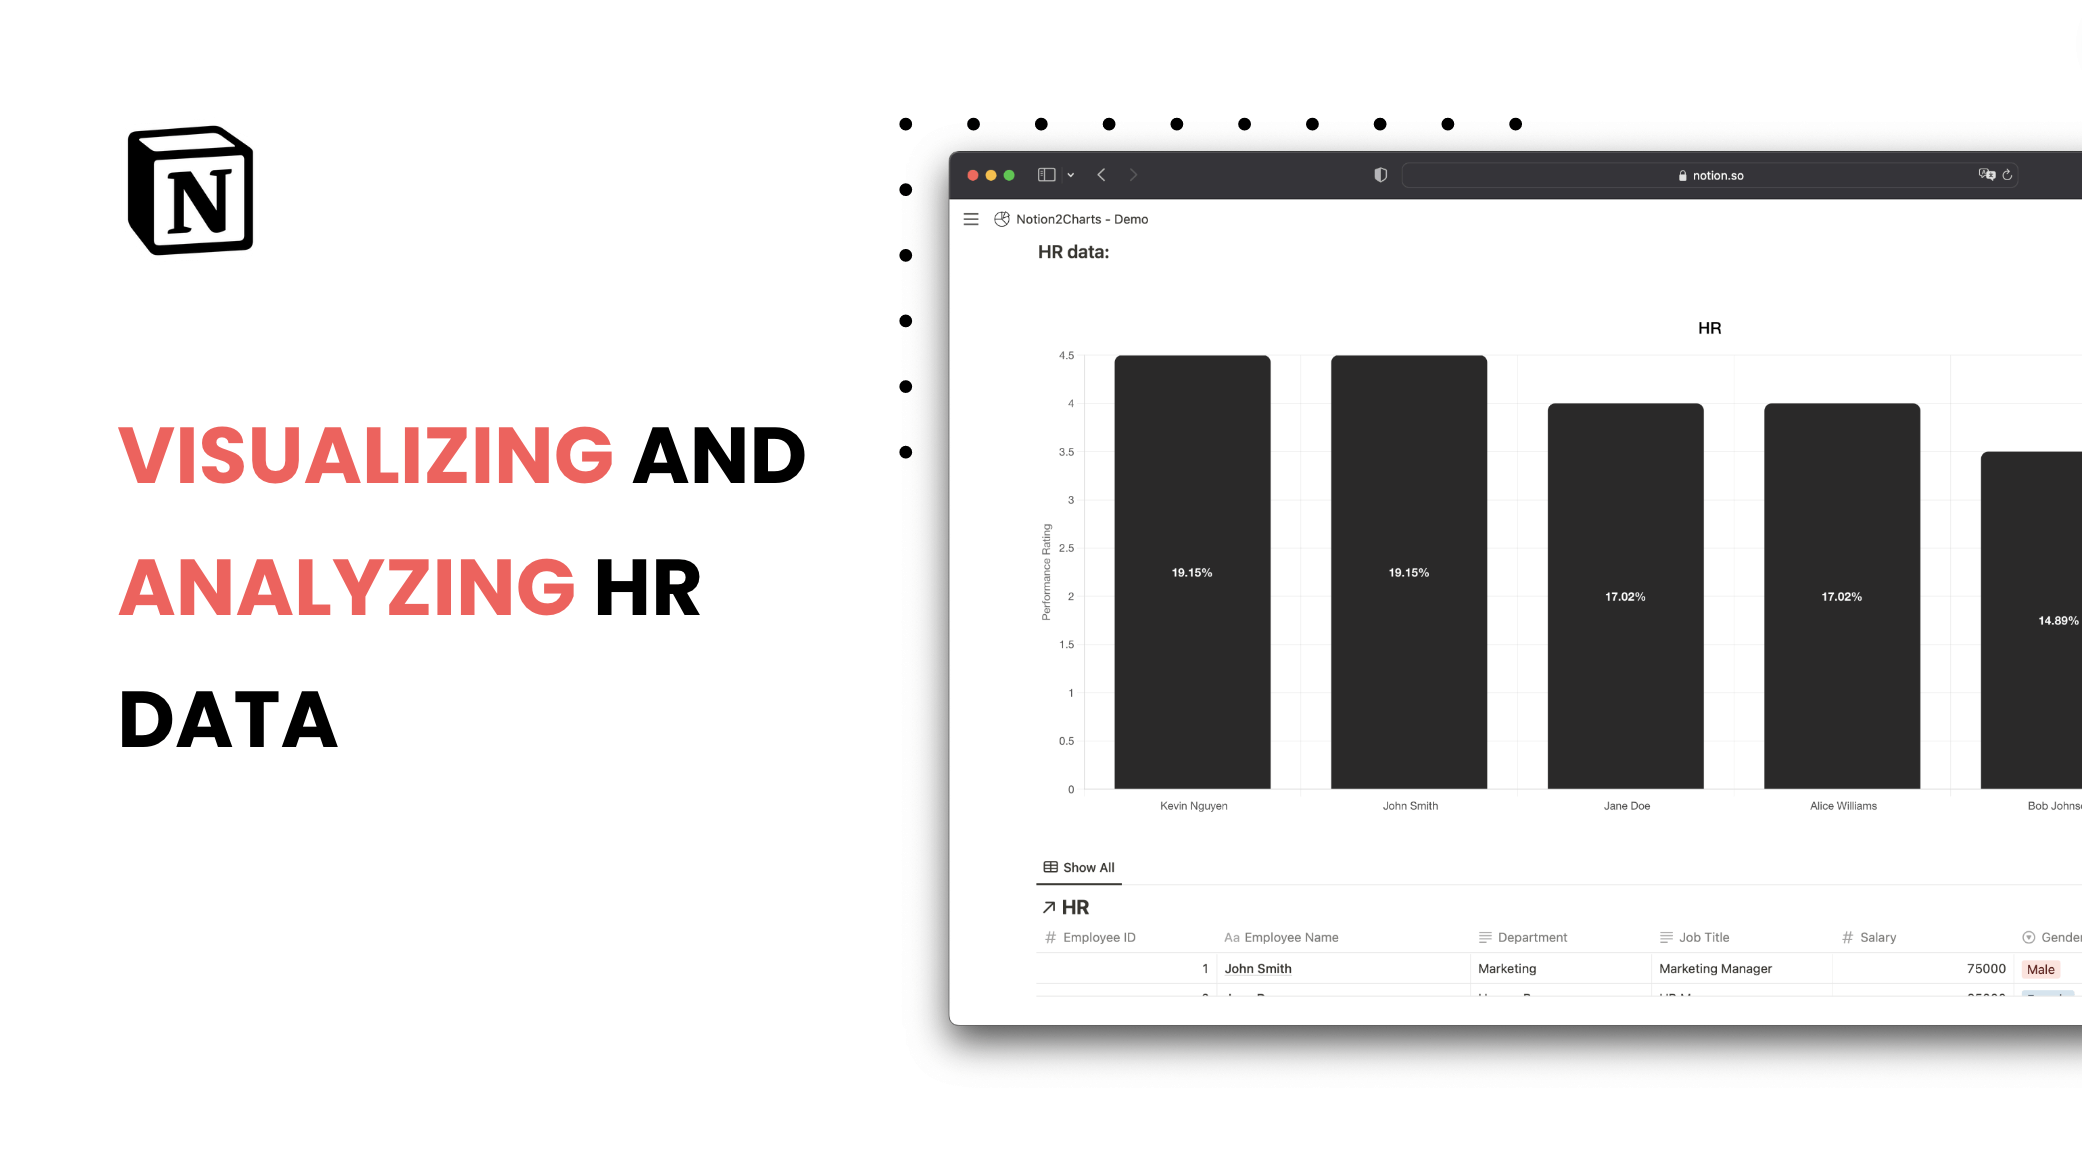 Visualizing and analyzing HR data with Notion2Charts